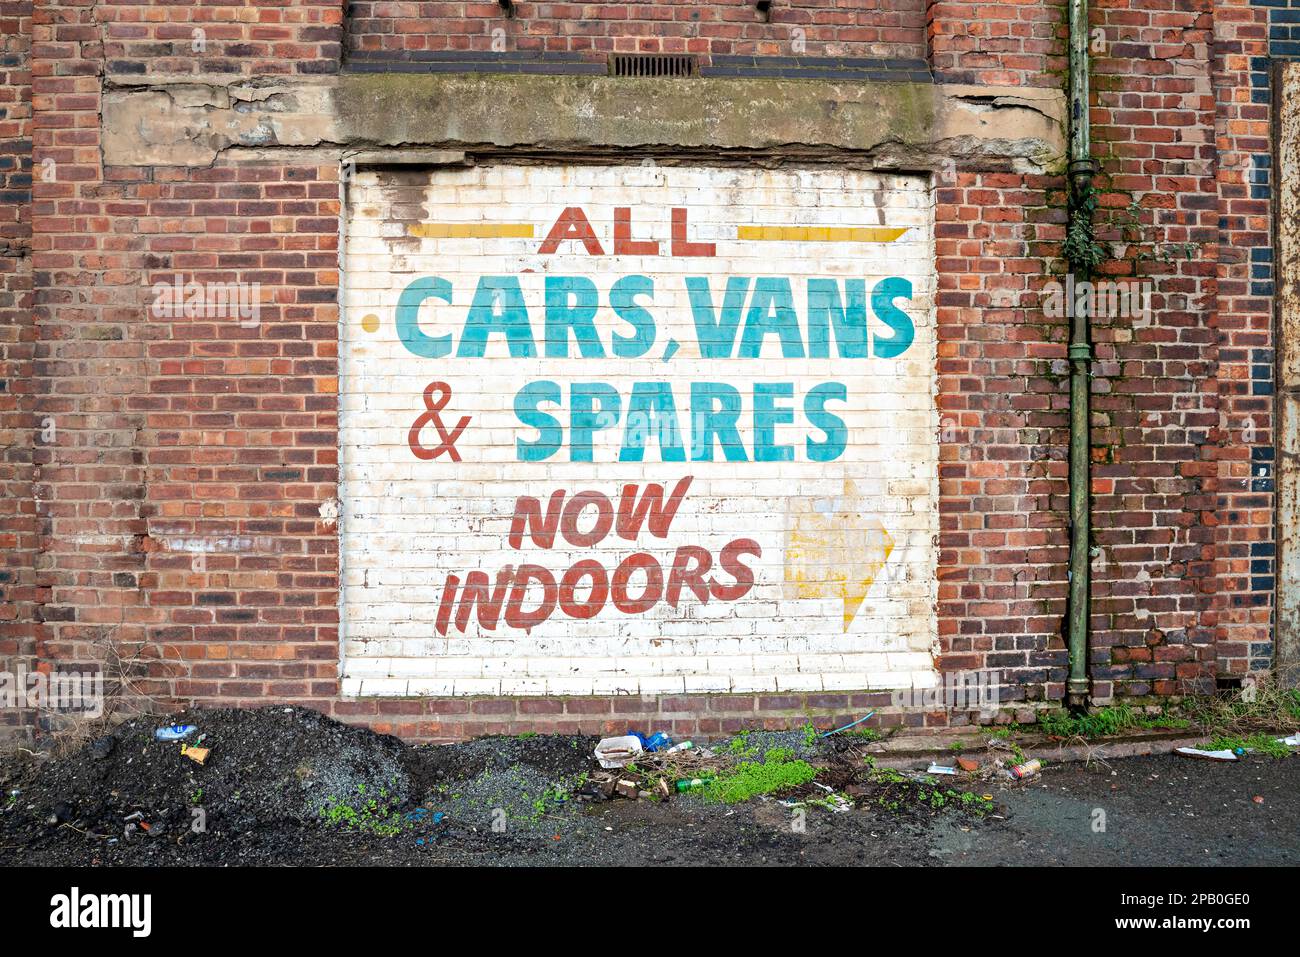 Painted Car Sales advertisement on warehouse wall Stock Photo